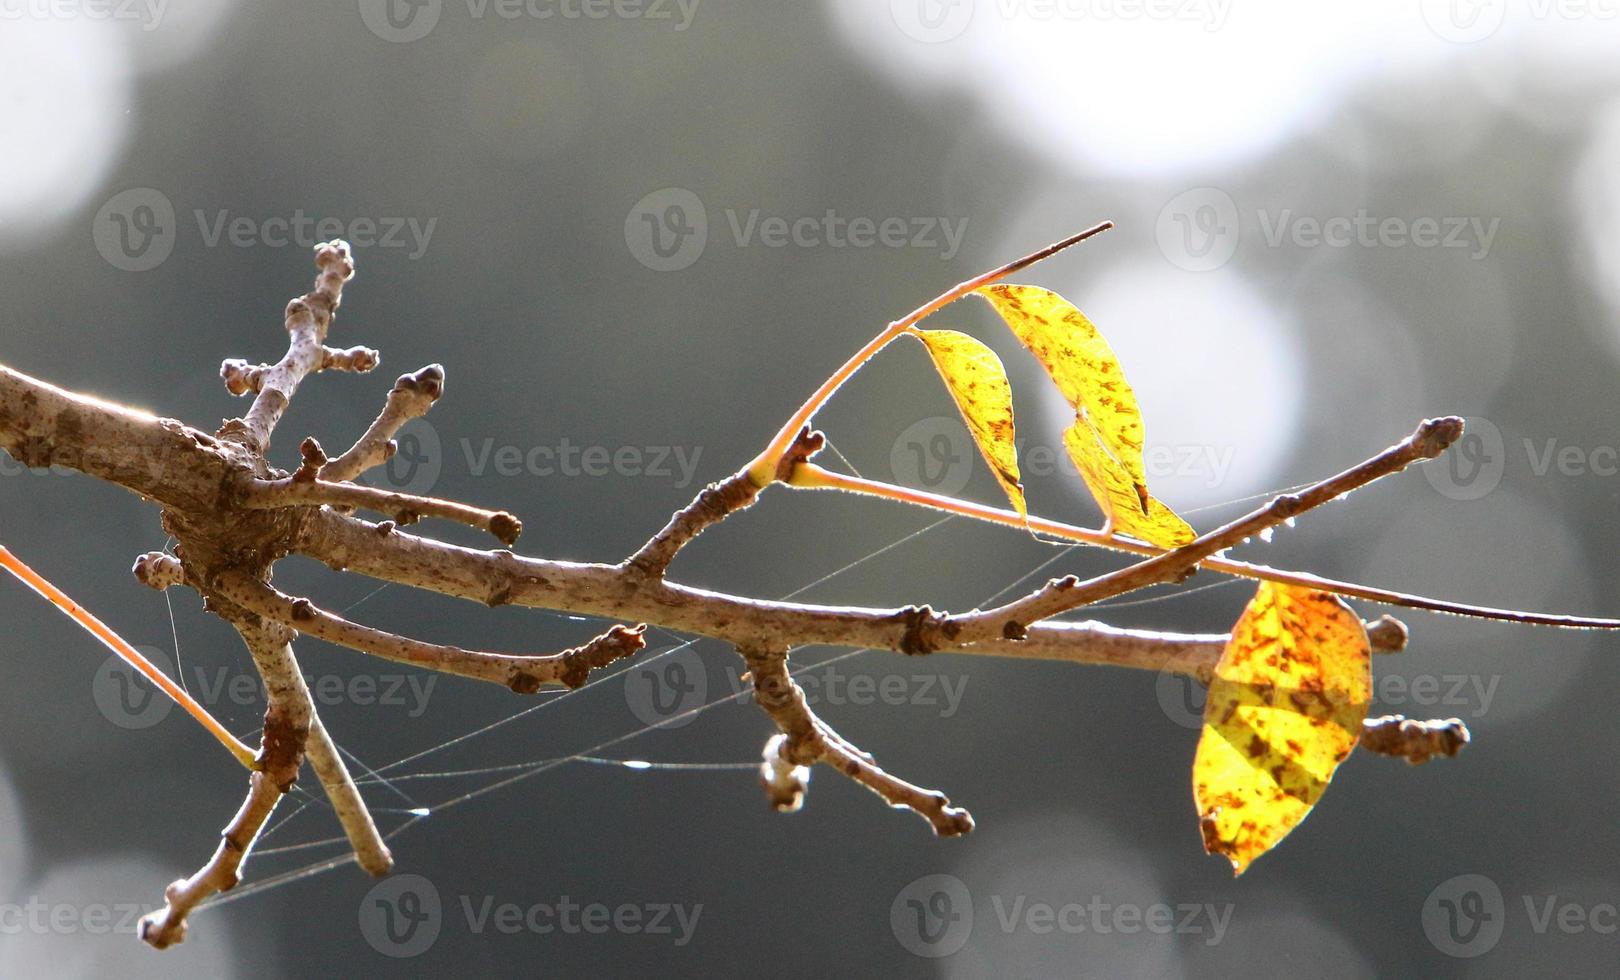 Spider webs - cobwebs on branches and leaves of trees in a city park. photo